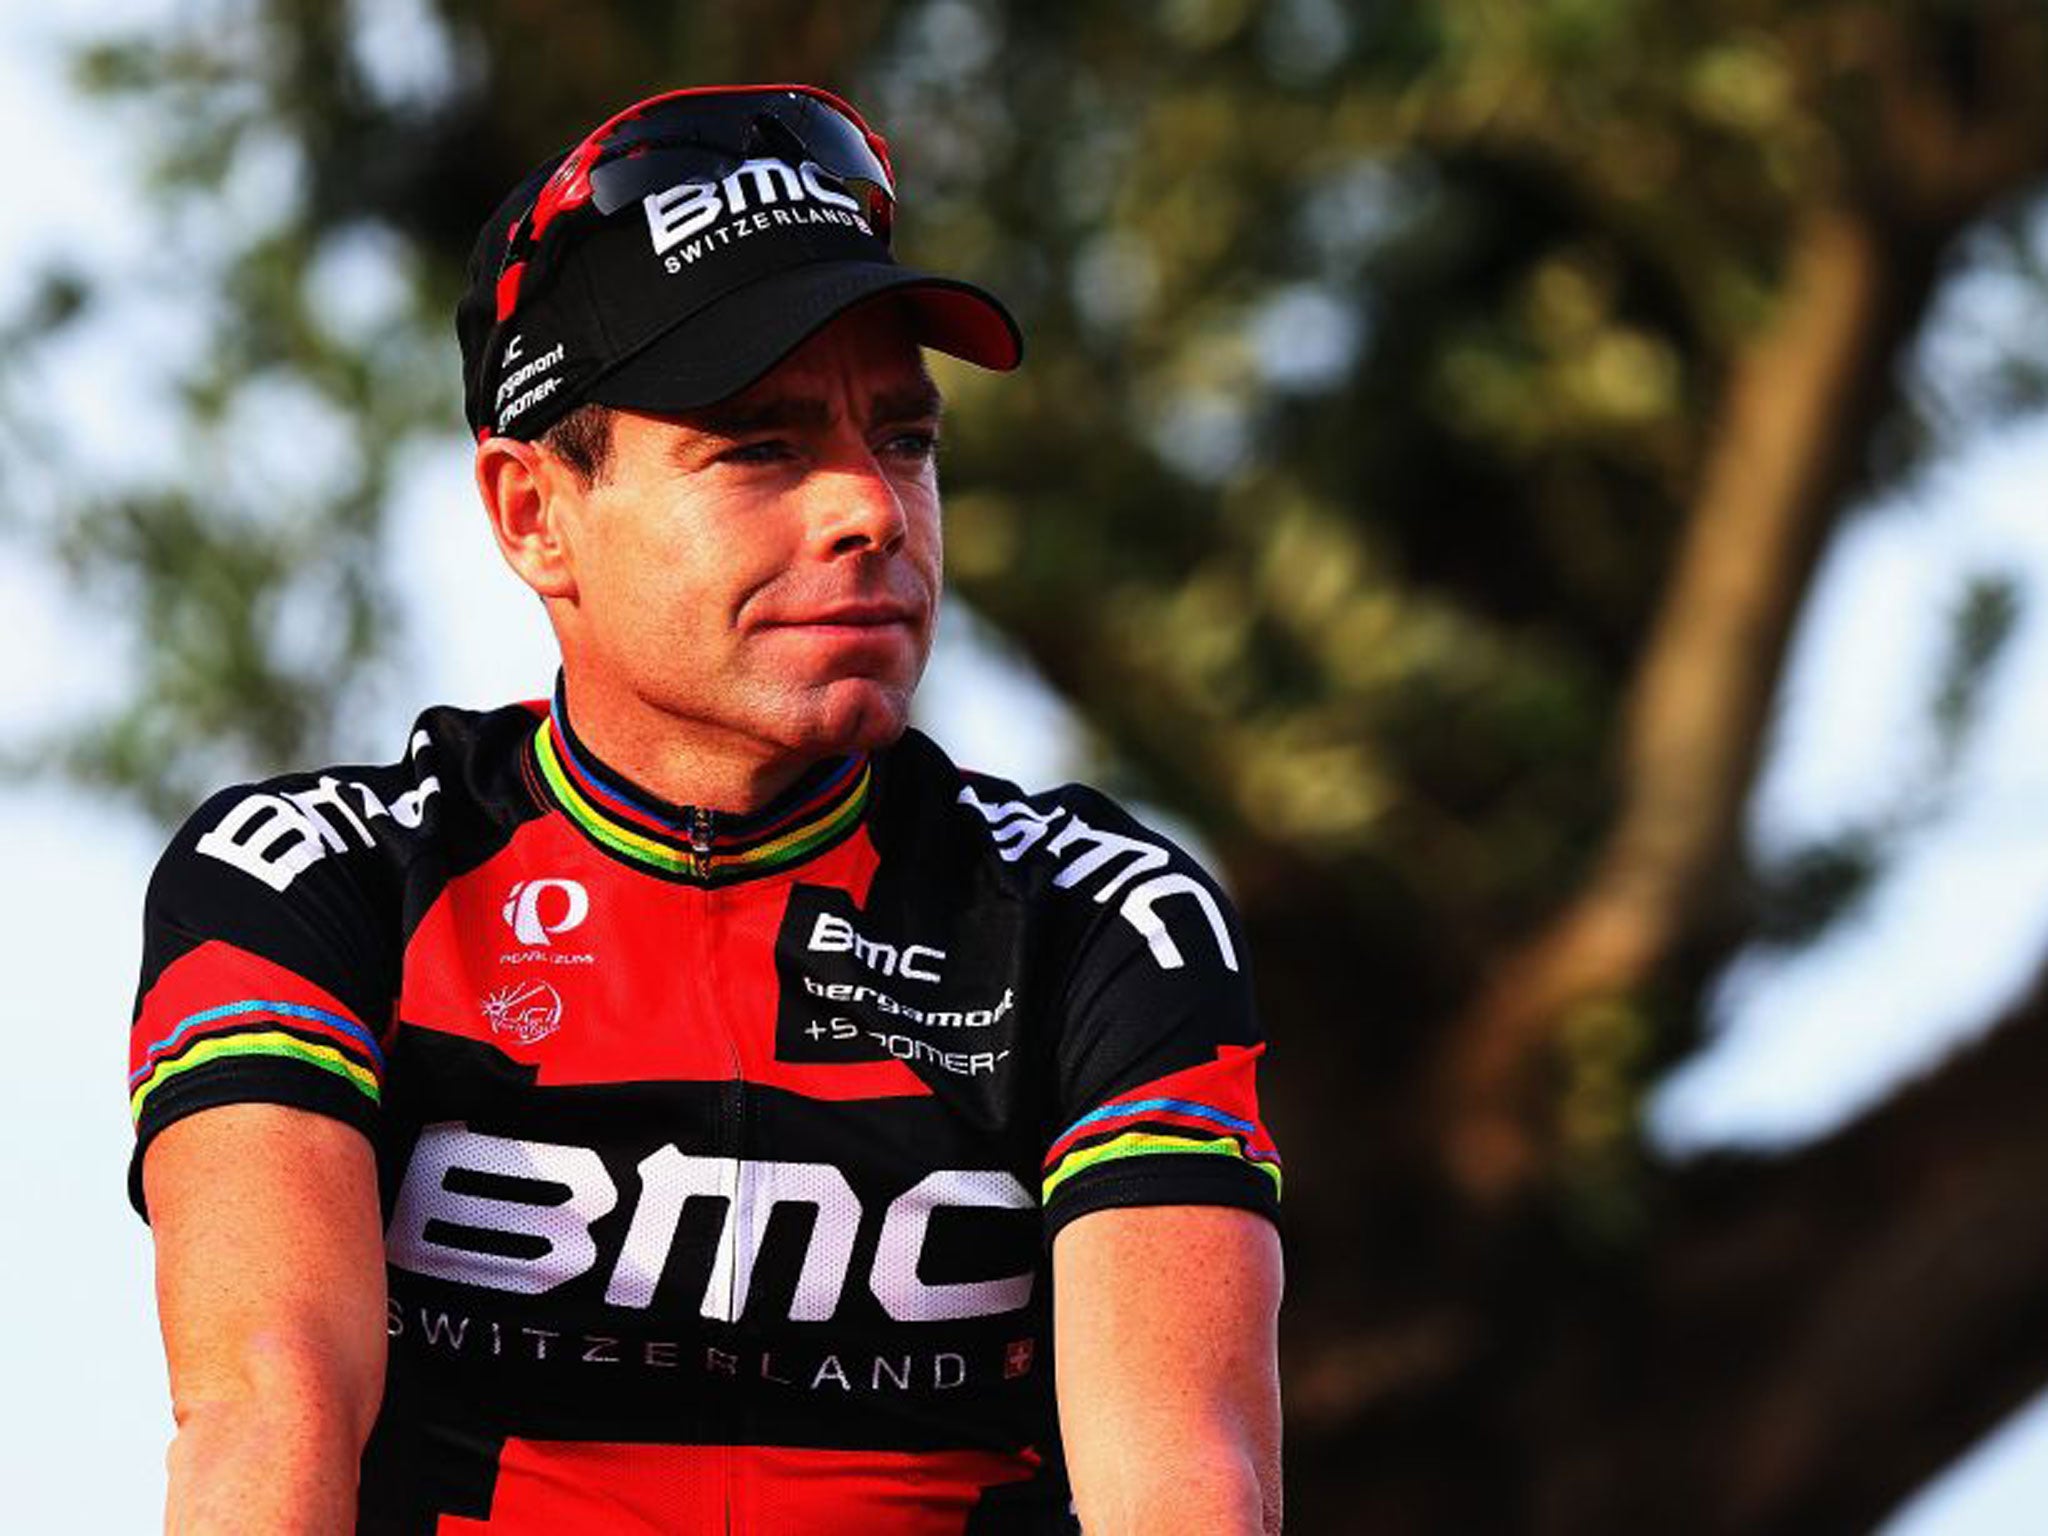 Cadel Evans’ team BMC Racing is fully supportive of his attempt to win this year’s Tour